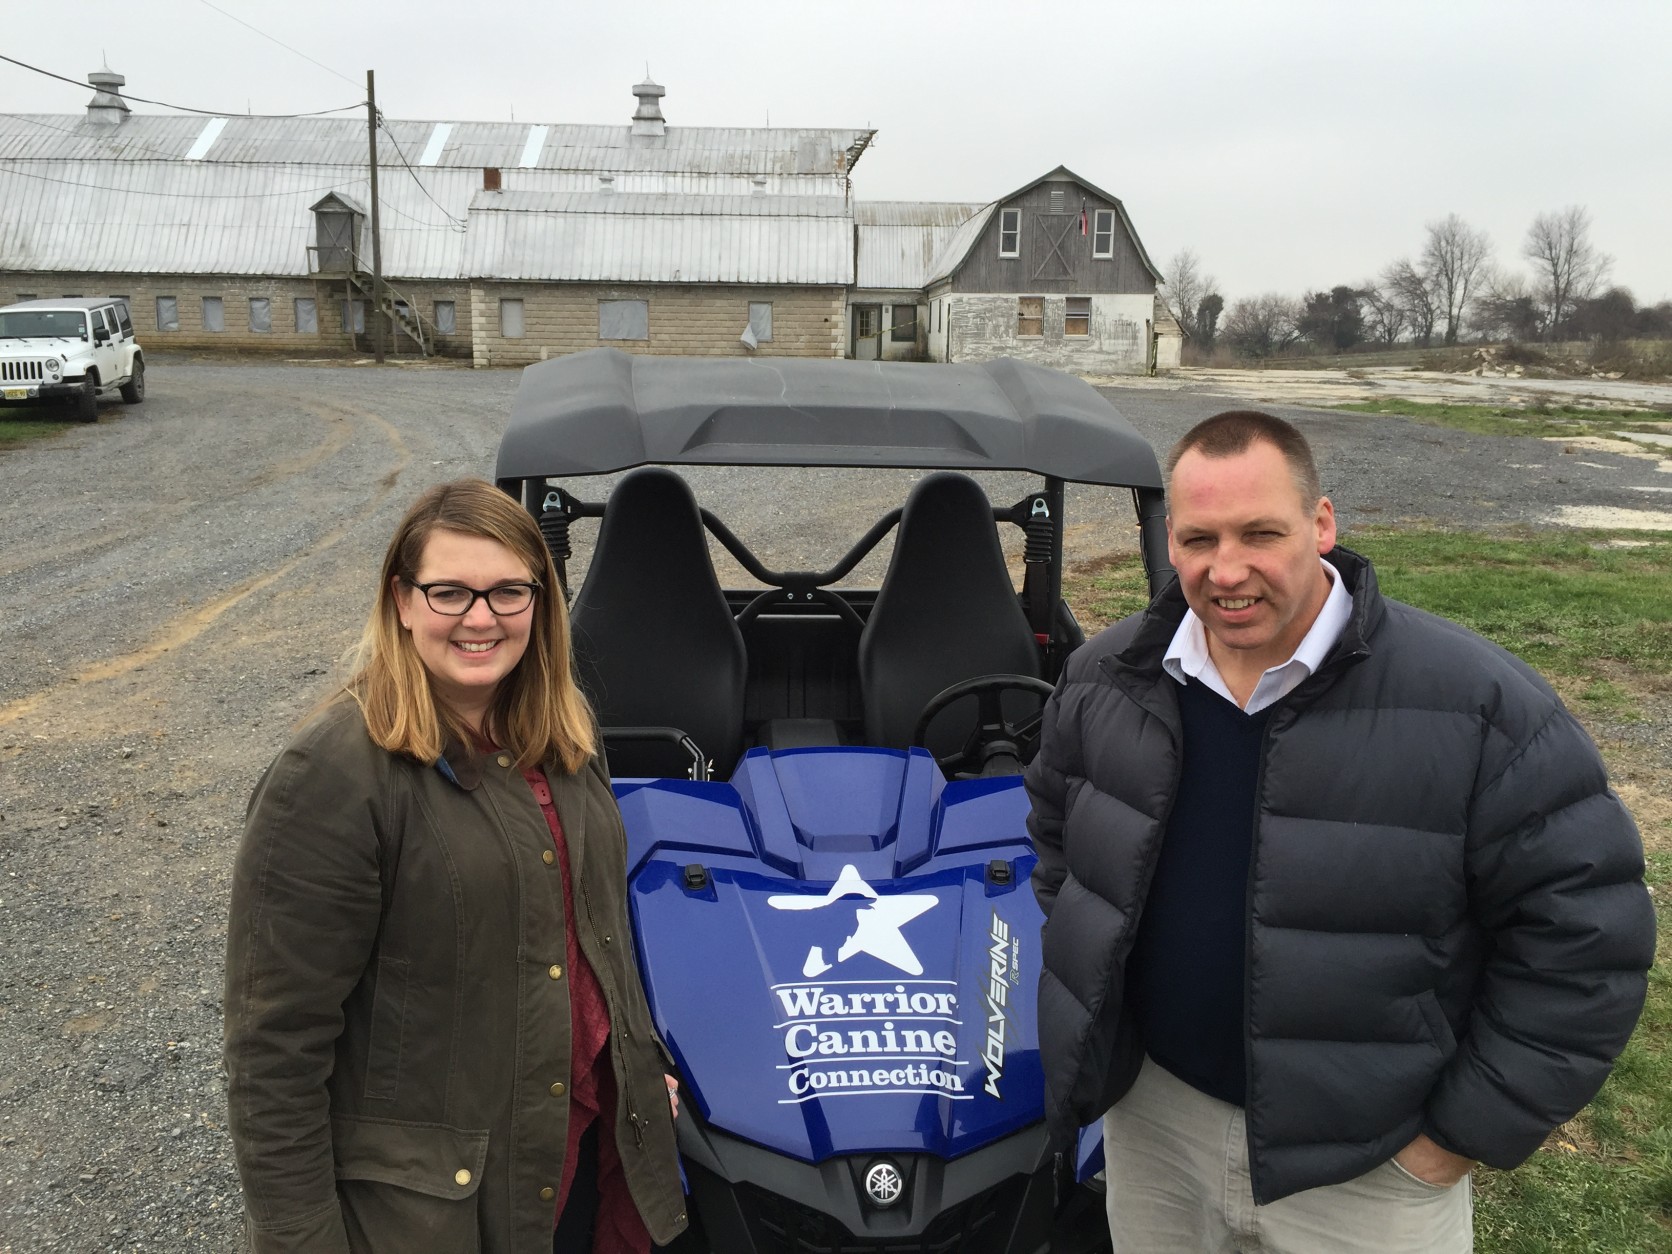 A deal with Maryland's Department of Natural Resources is allowing Warrior Canine Connection to renovate an old dairy farm for a training facility. Meredith Beck of the Bob Woodruff Foundation just handed over the keys to this UTV to WCC Executive Director Rick Yount. (WTOP/Kristi King)